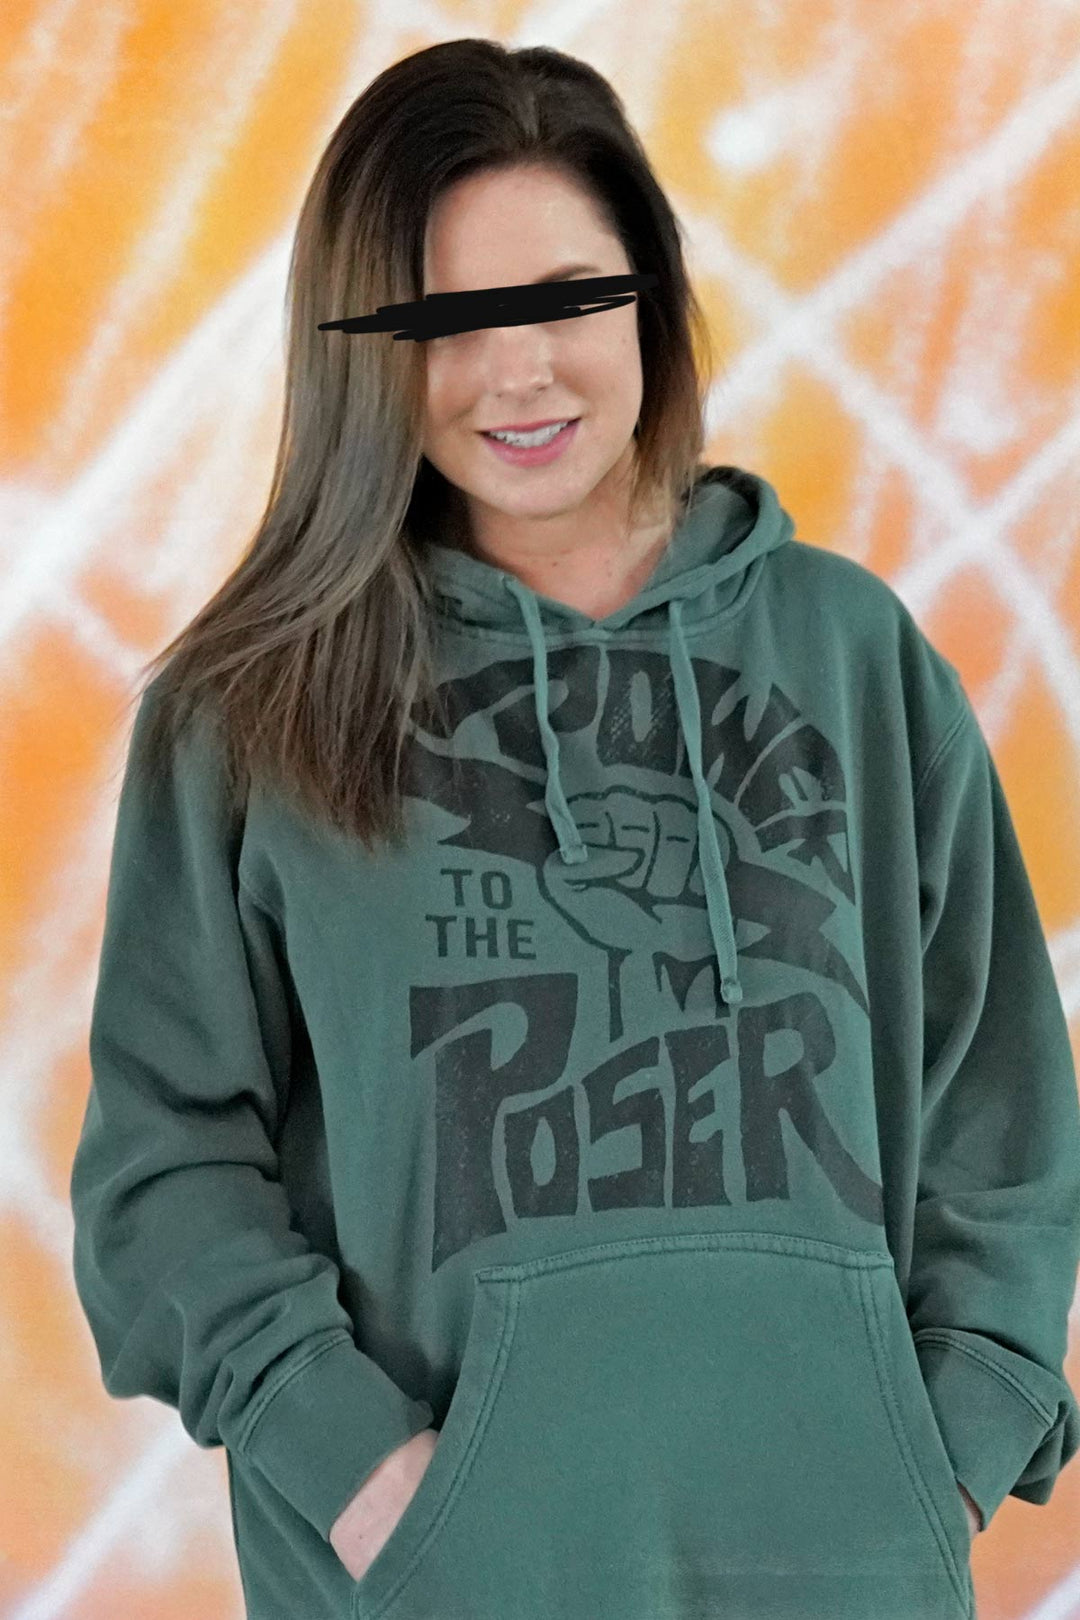 Power to the POSER Hoodie